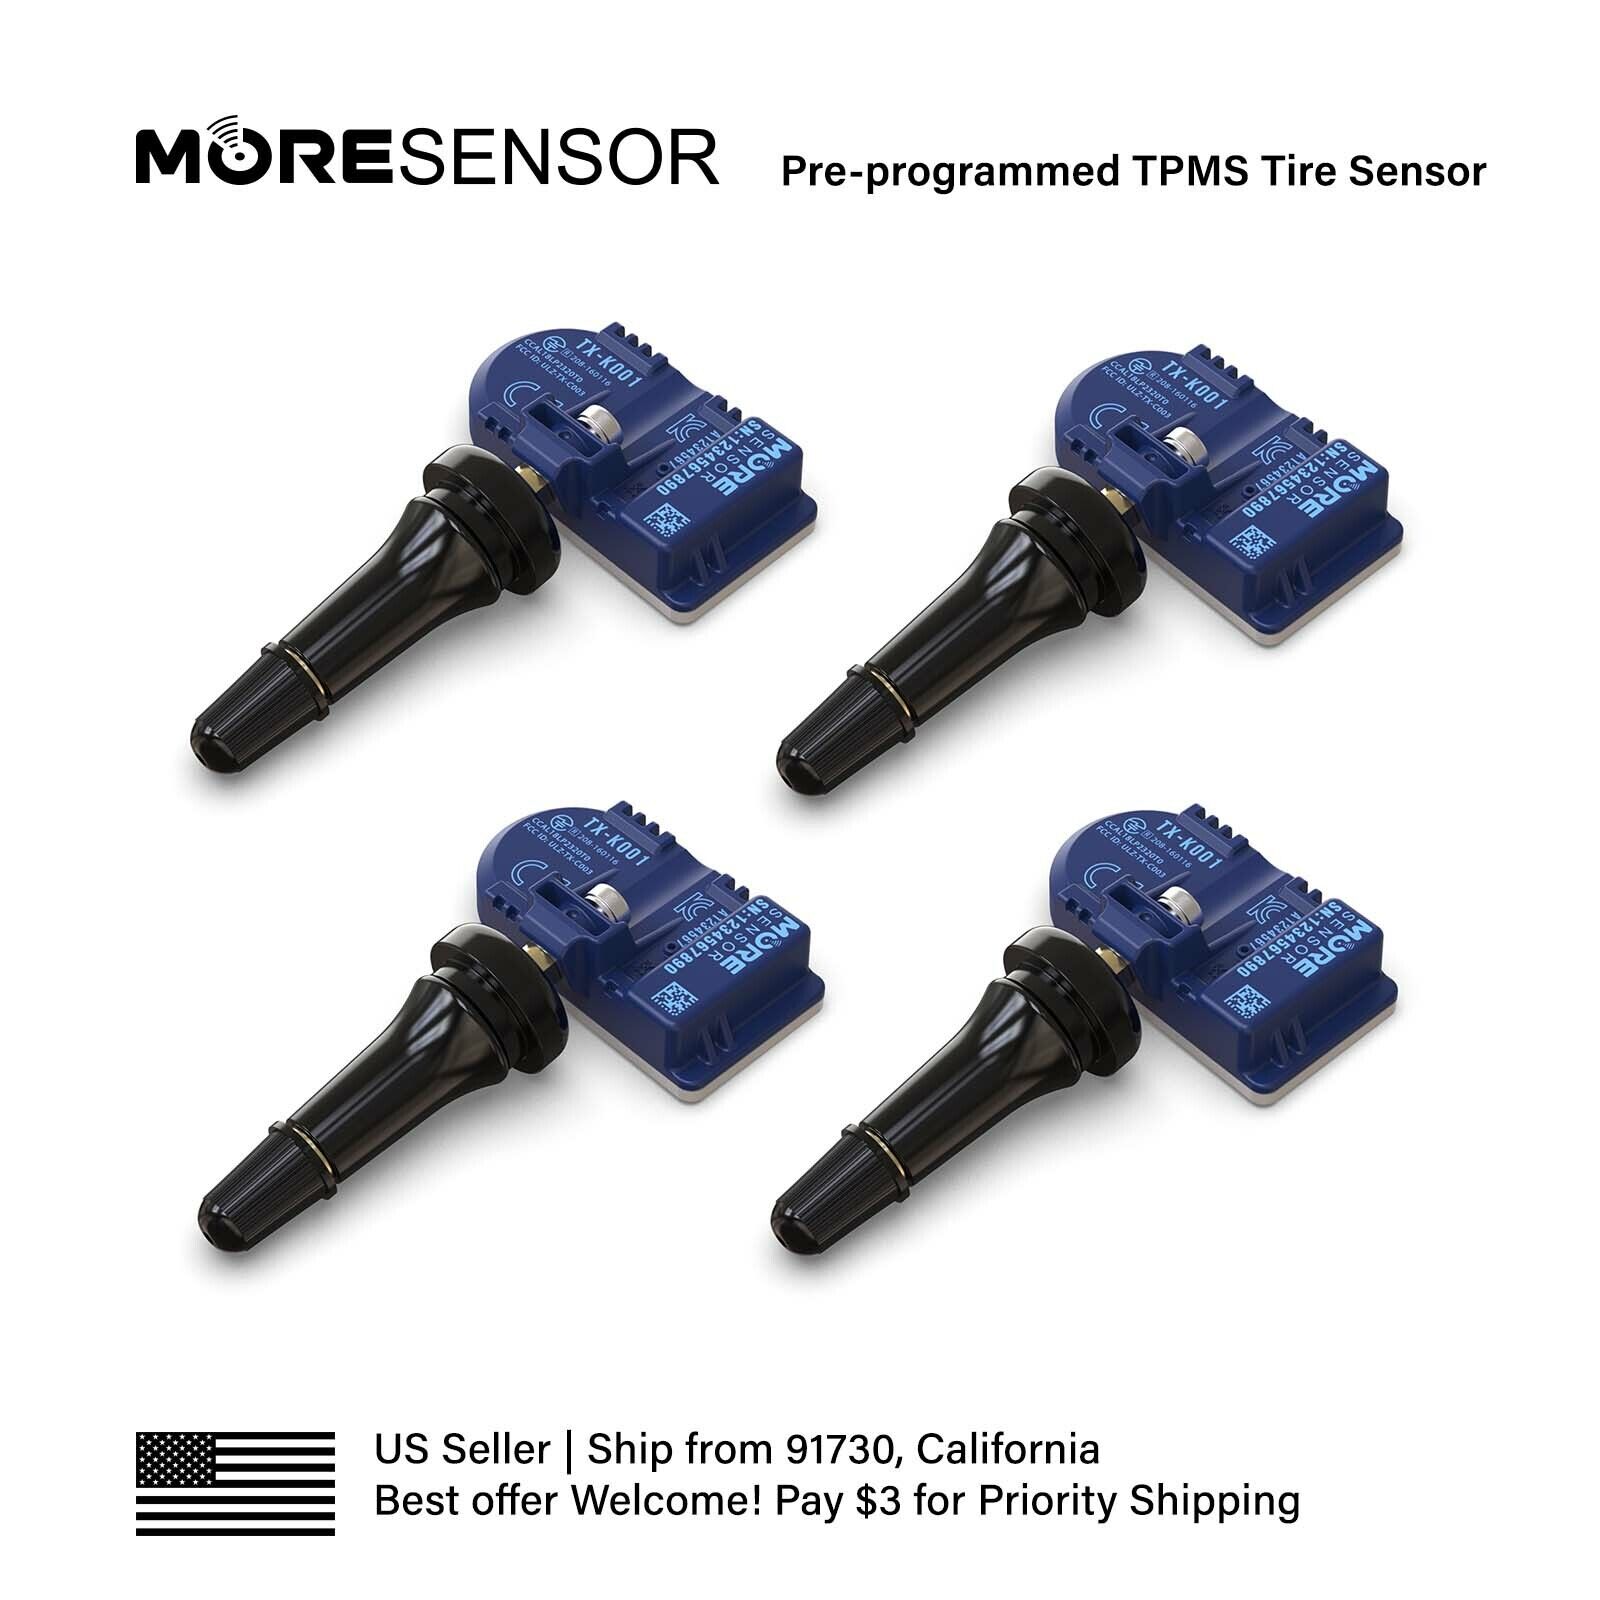 4PC 433MHz MORESENSOR TPMS Snap-in Tire Sensor for 2004-2007 Saab 9-3 9-5